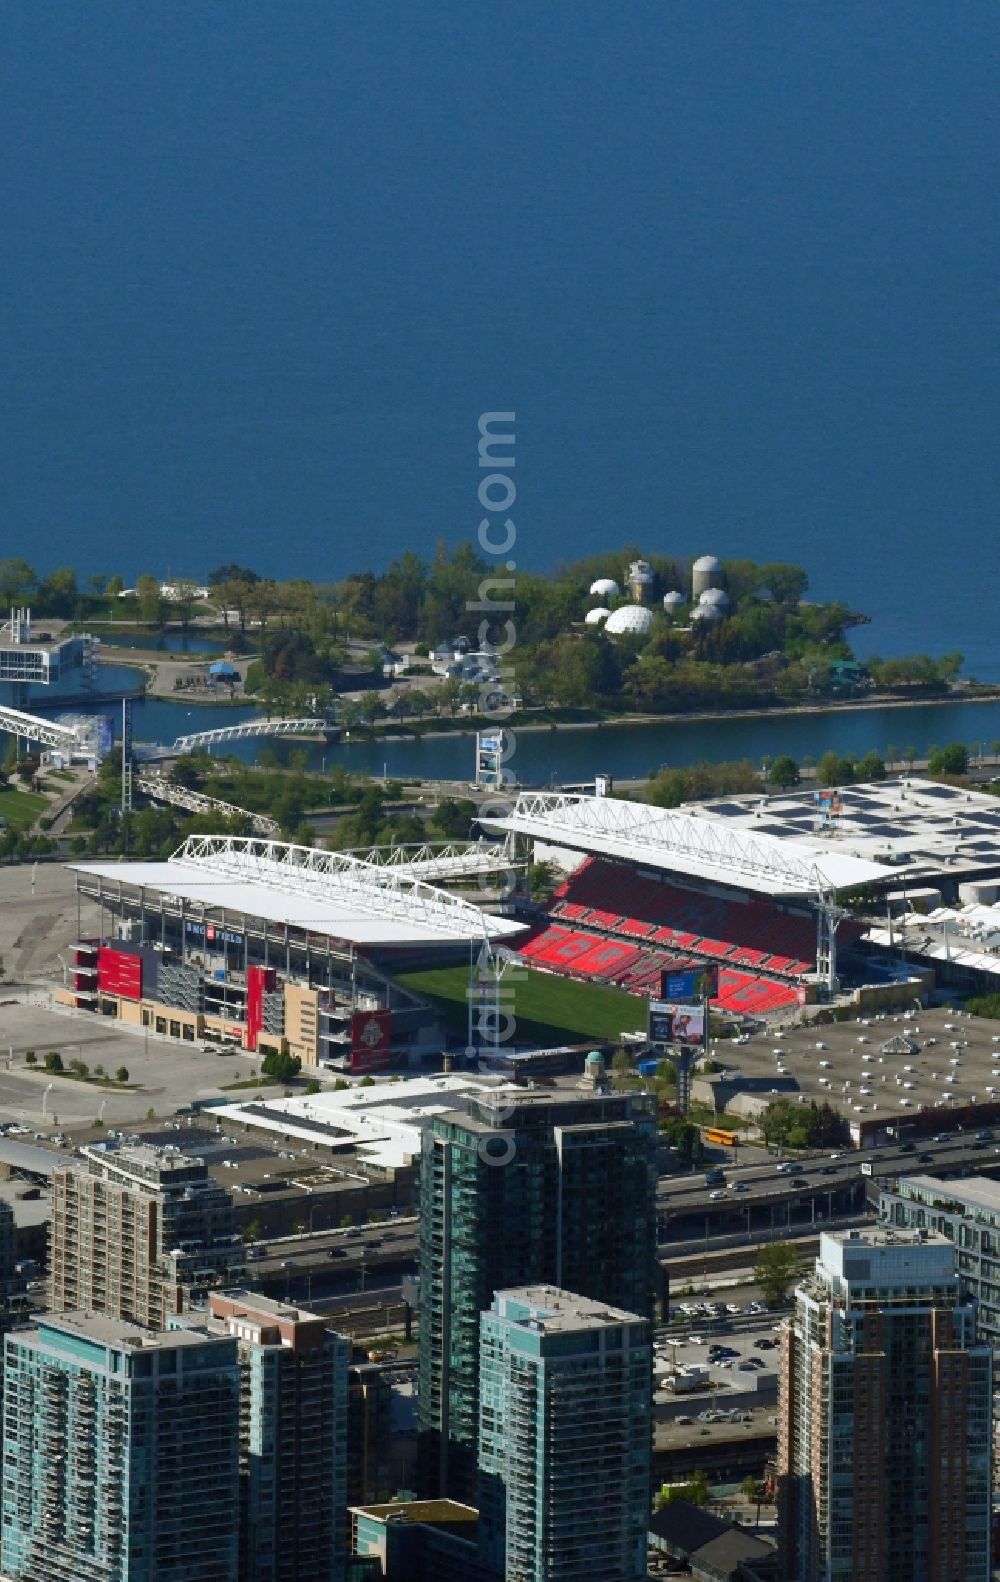 Toronto from above - Sports facility grounds of the Arena stadium BMO Field on Princes' Blvd in the district Old Toronto in Toronto in Ontario, Canada